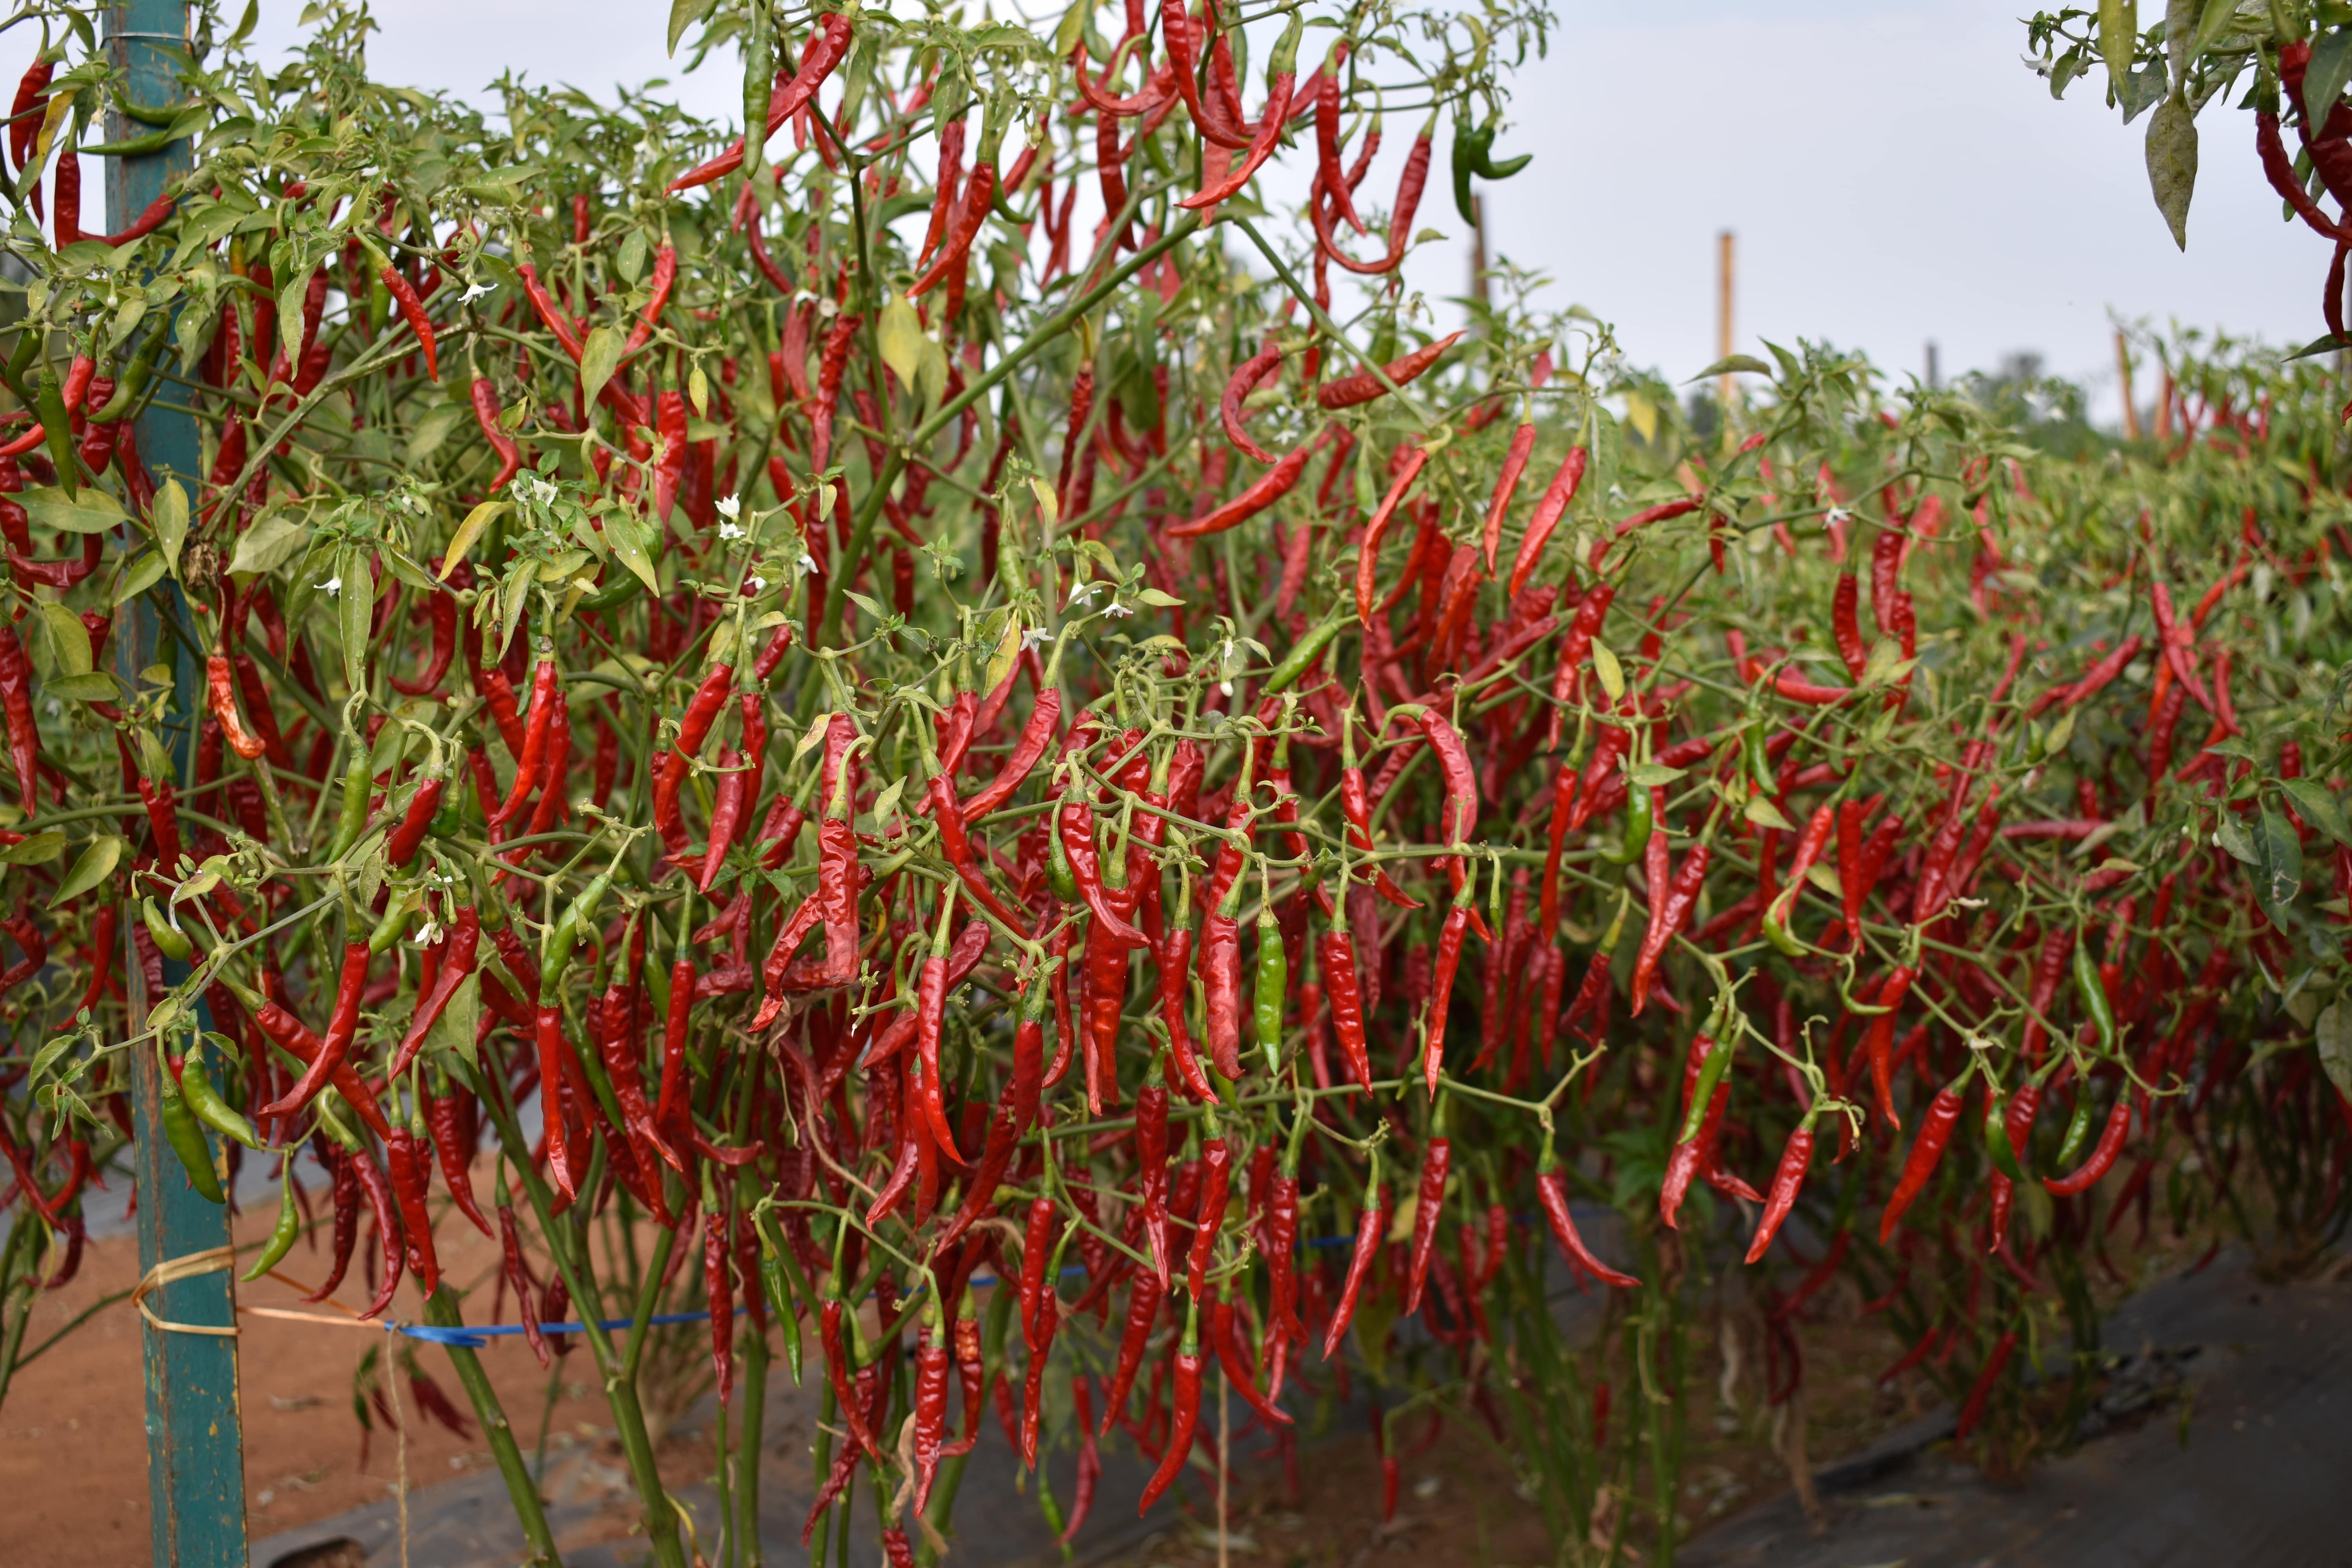 Laava hybrid from East-West Seed India making a positive impact for chilli farmers in Telangana